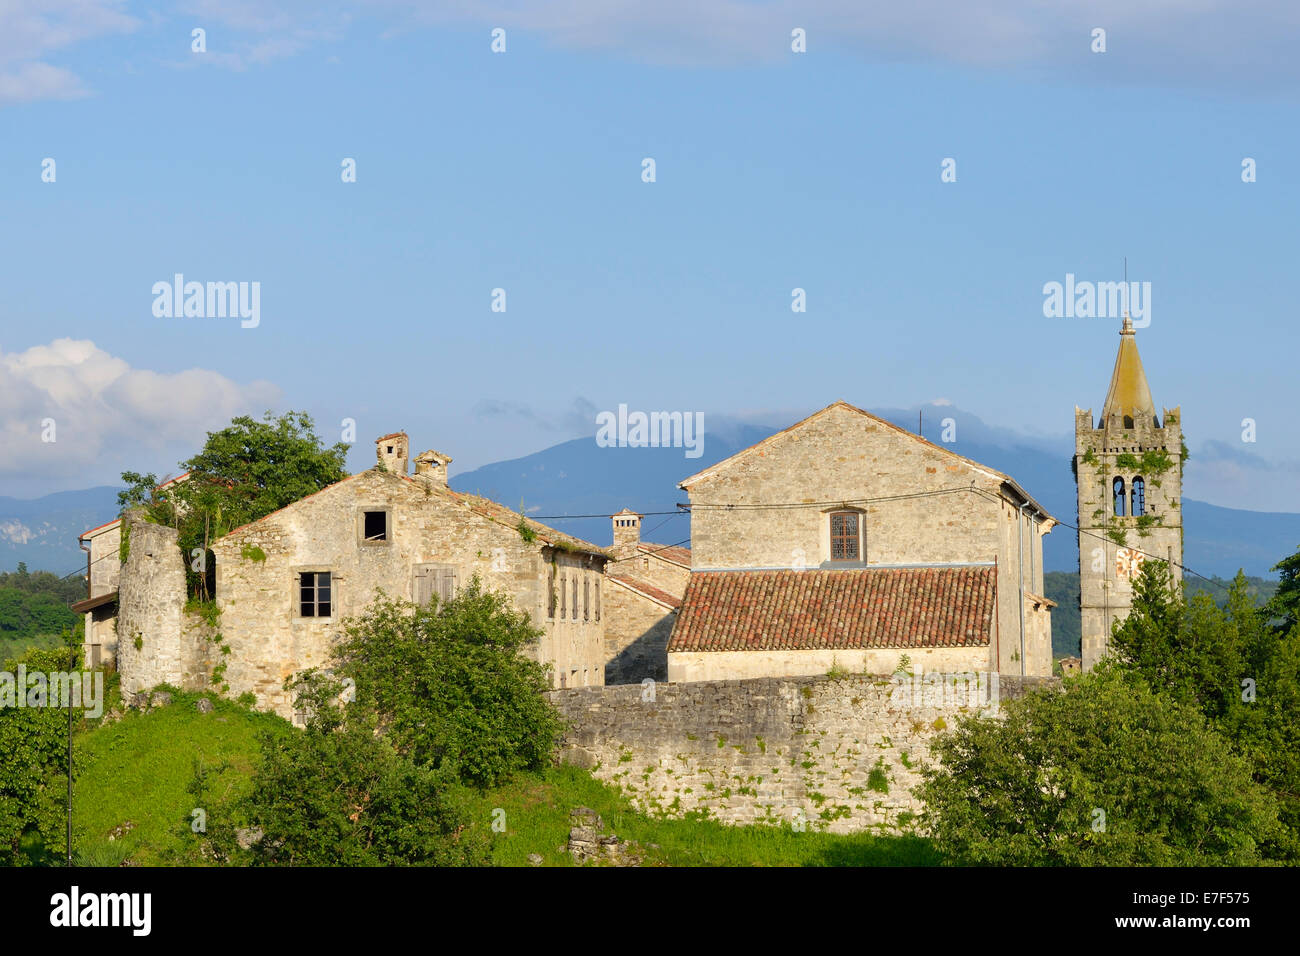 The smallest town in the world, with the bell tower of the Church of the Assumption, Hum, Istria, Croatia Stock Photo